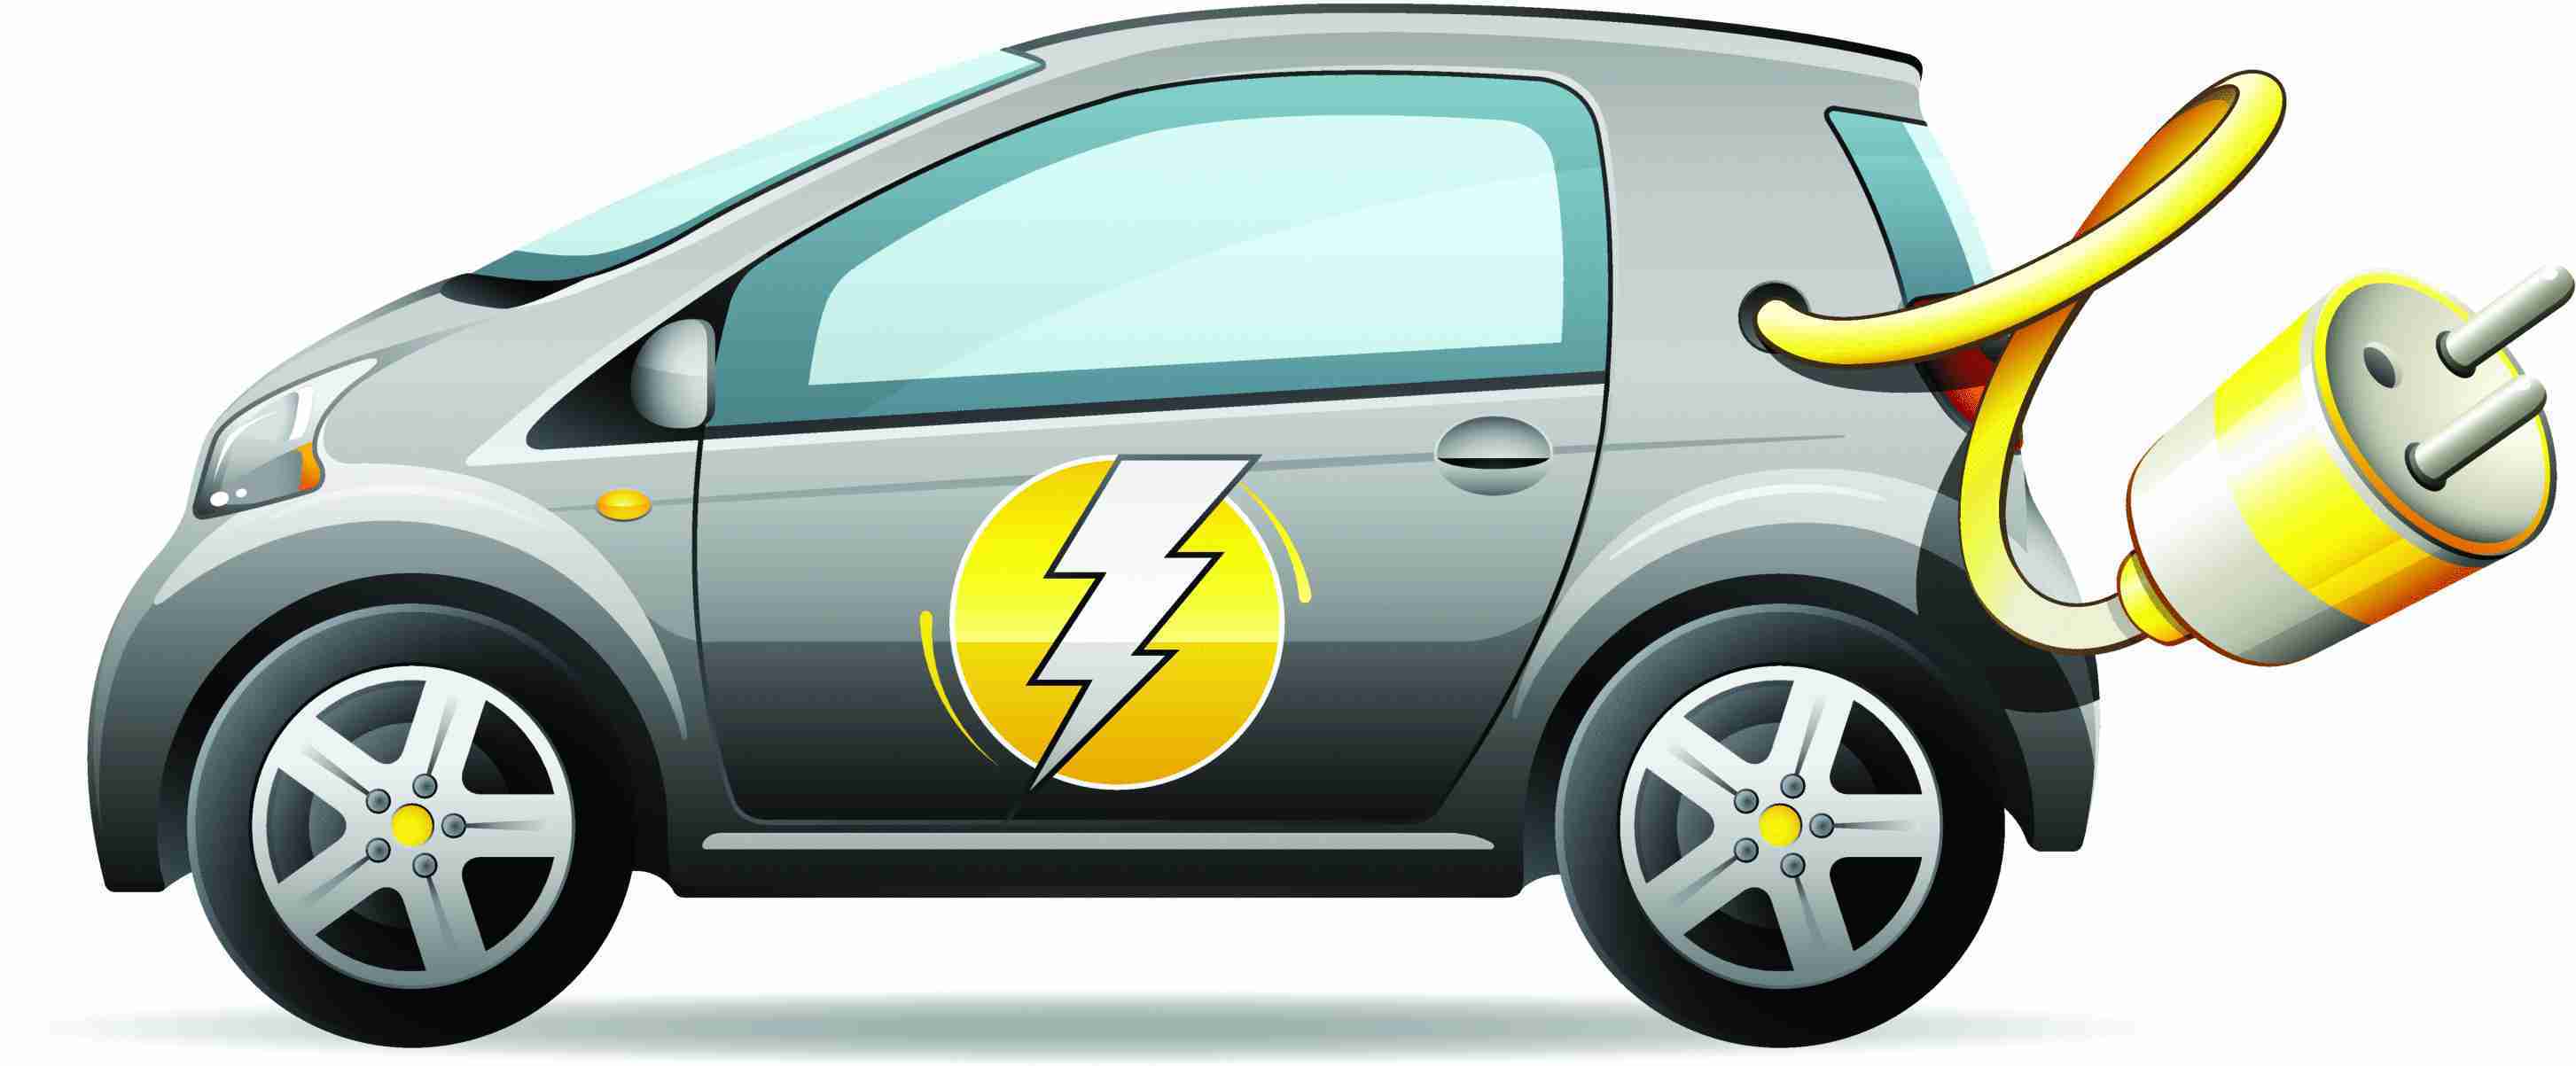 about-131-250-in-connecticut-electric-car-rebates-approved-south